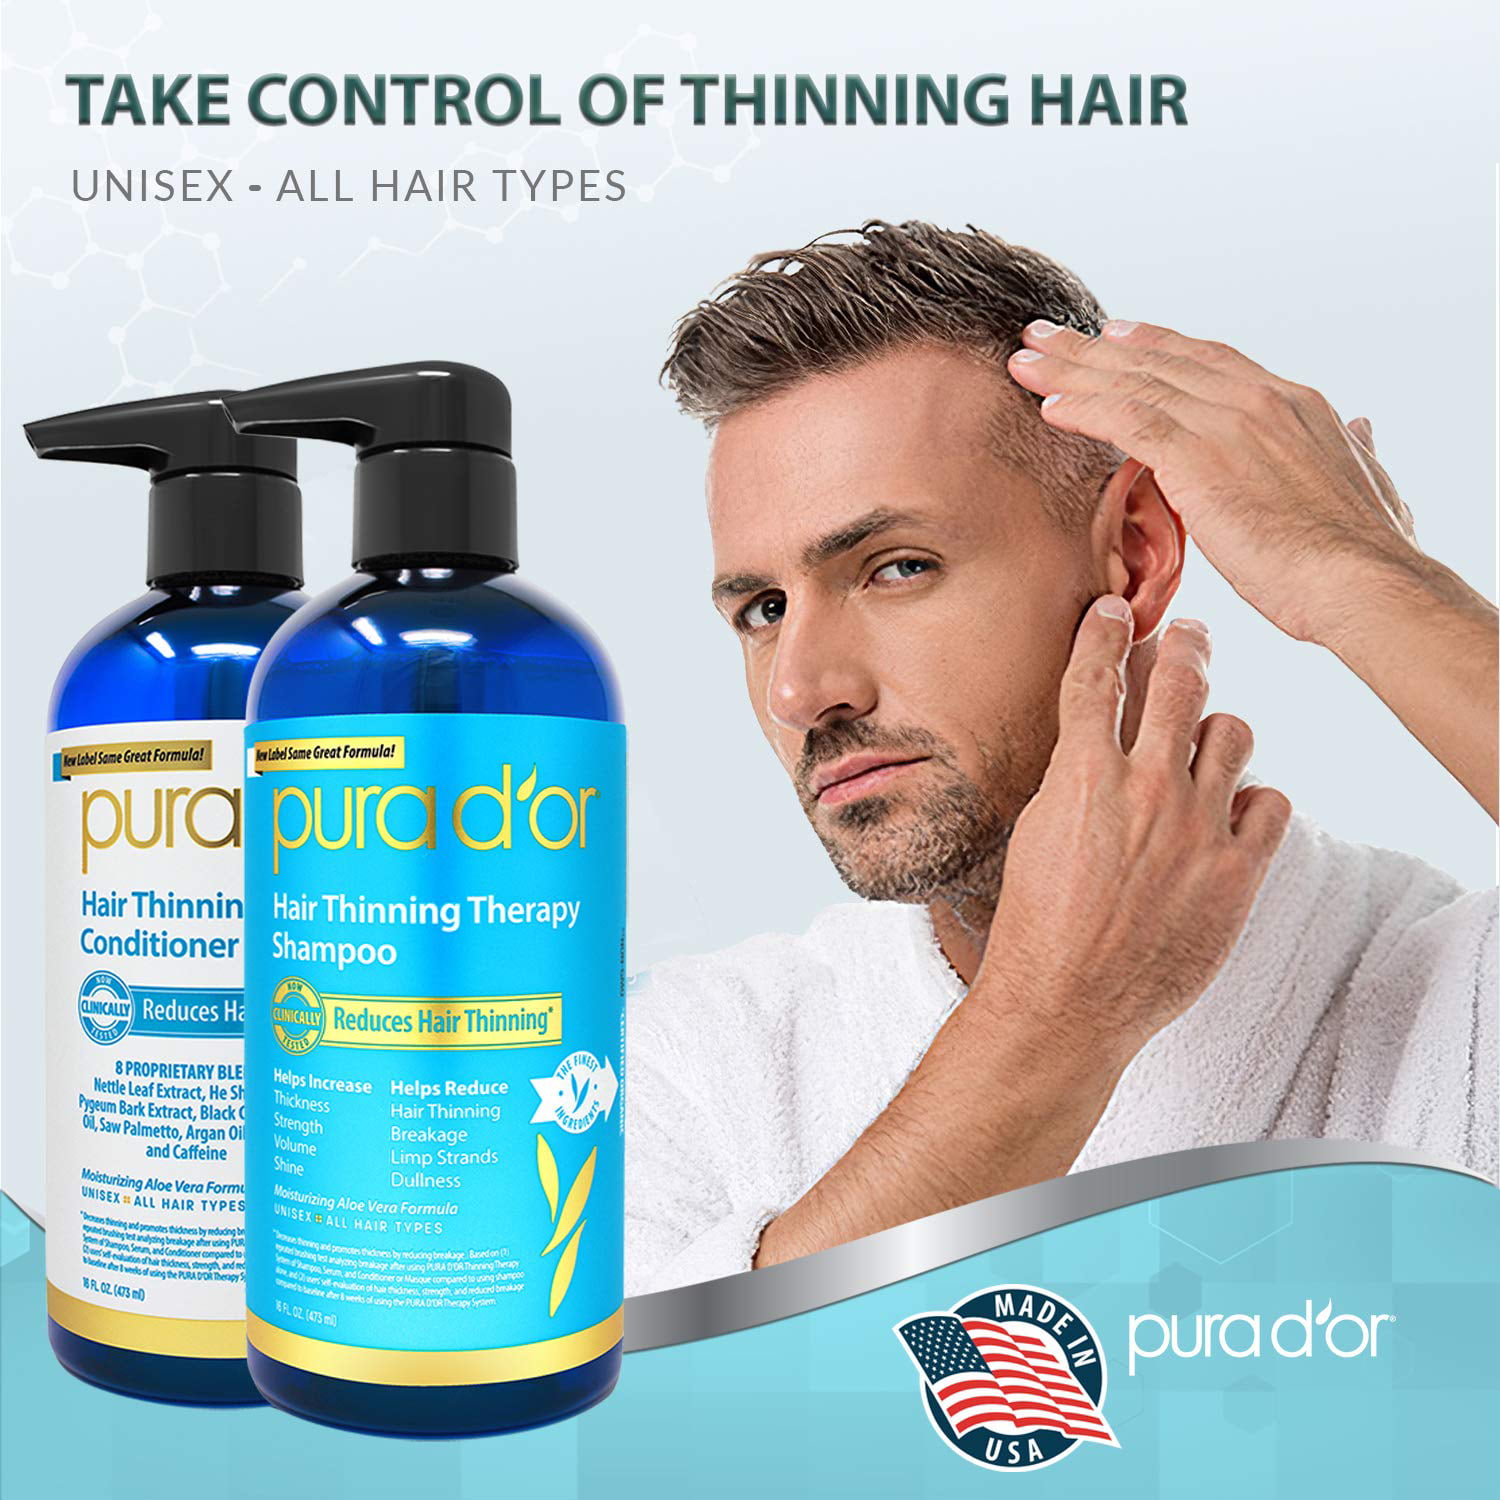 Hair Thinning Therapy Shampoo 16oz (packaging may vary) – PURA D'OR